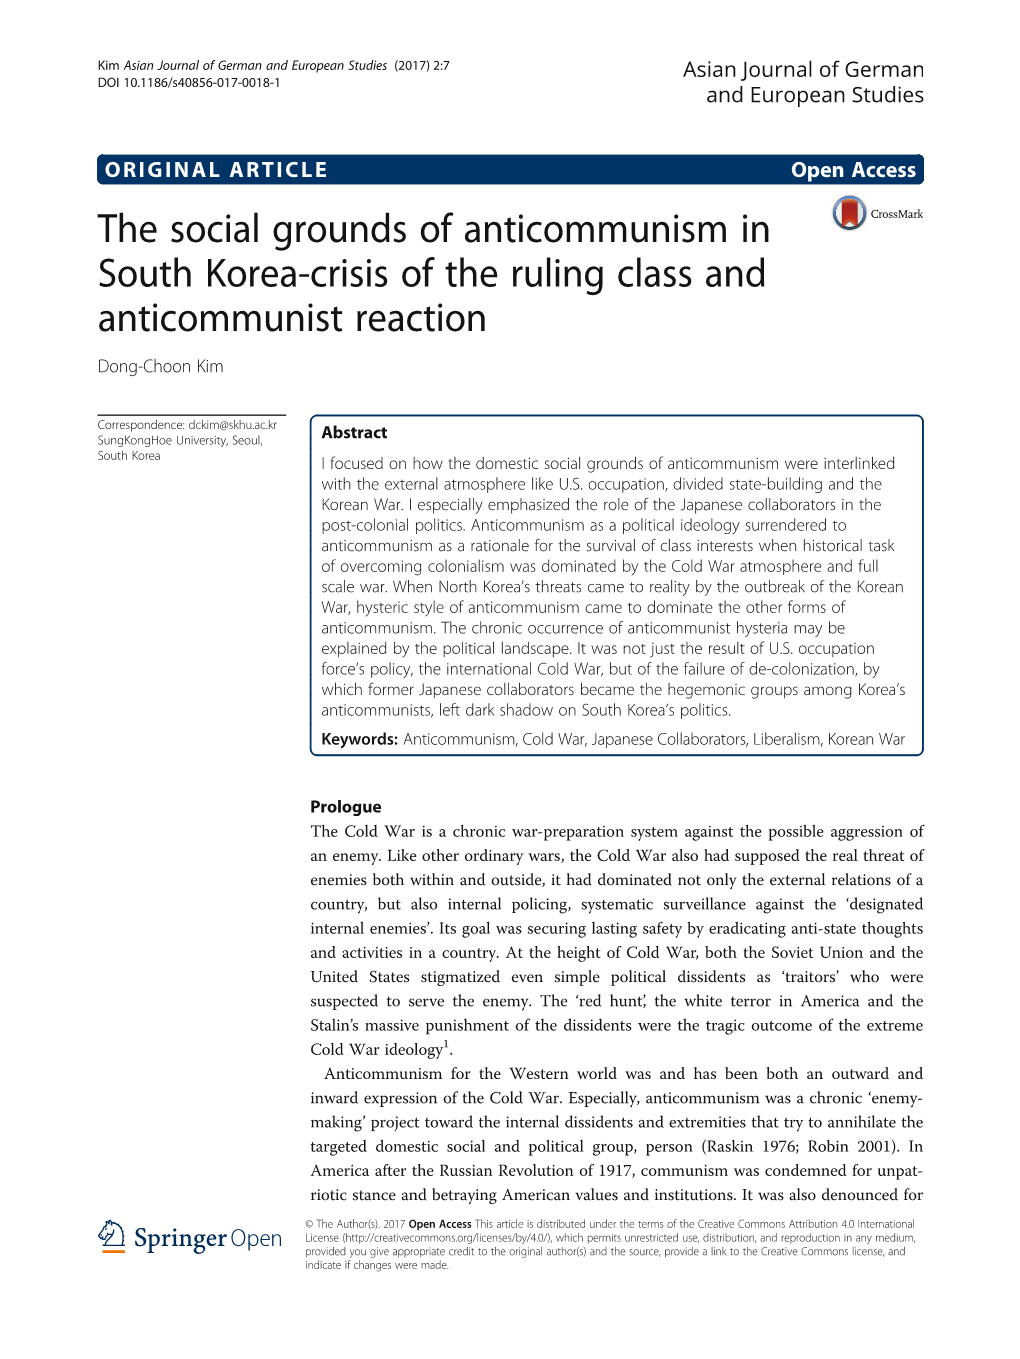 The Social Grounds of Anticommunism in South Korea-Crisis of the Ruling Class and Anticommunist Reaction Dong-Choon Kim